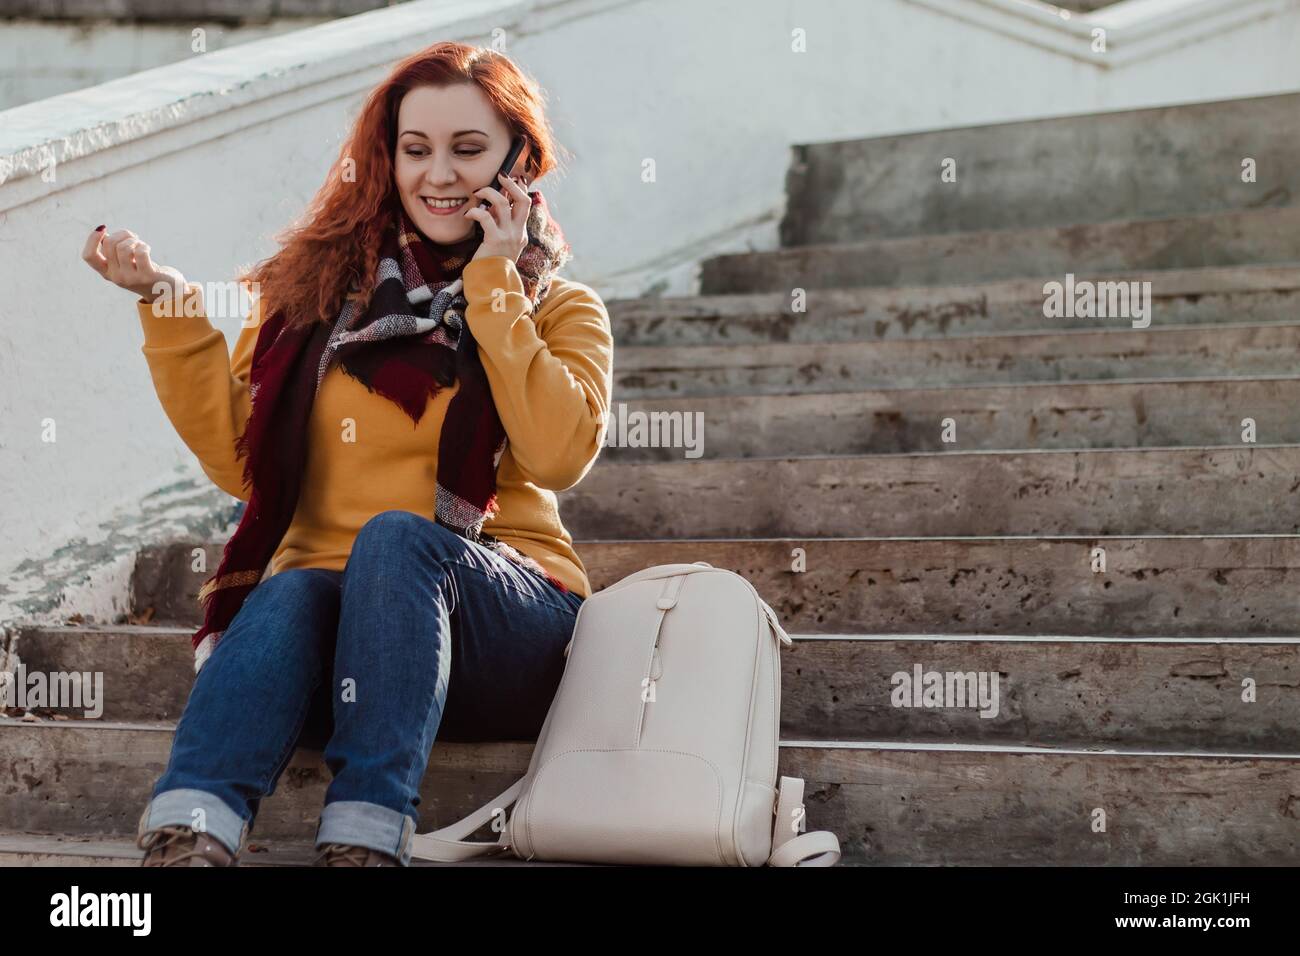 Young red-haired woman sitting on stairsand talking on phone. Lady in yellow sweater uses smartphone on sunny day. Lifestyle, copy space. Stock Photo